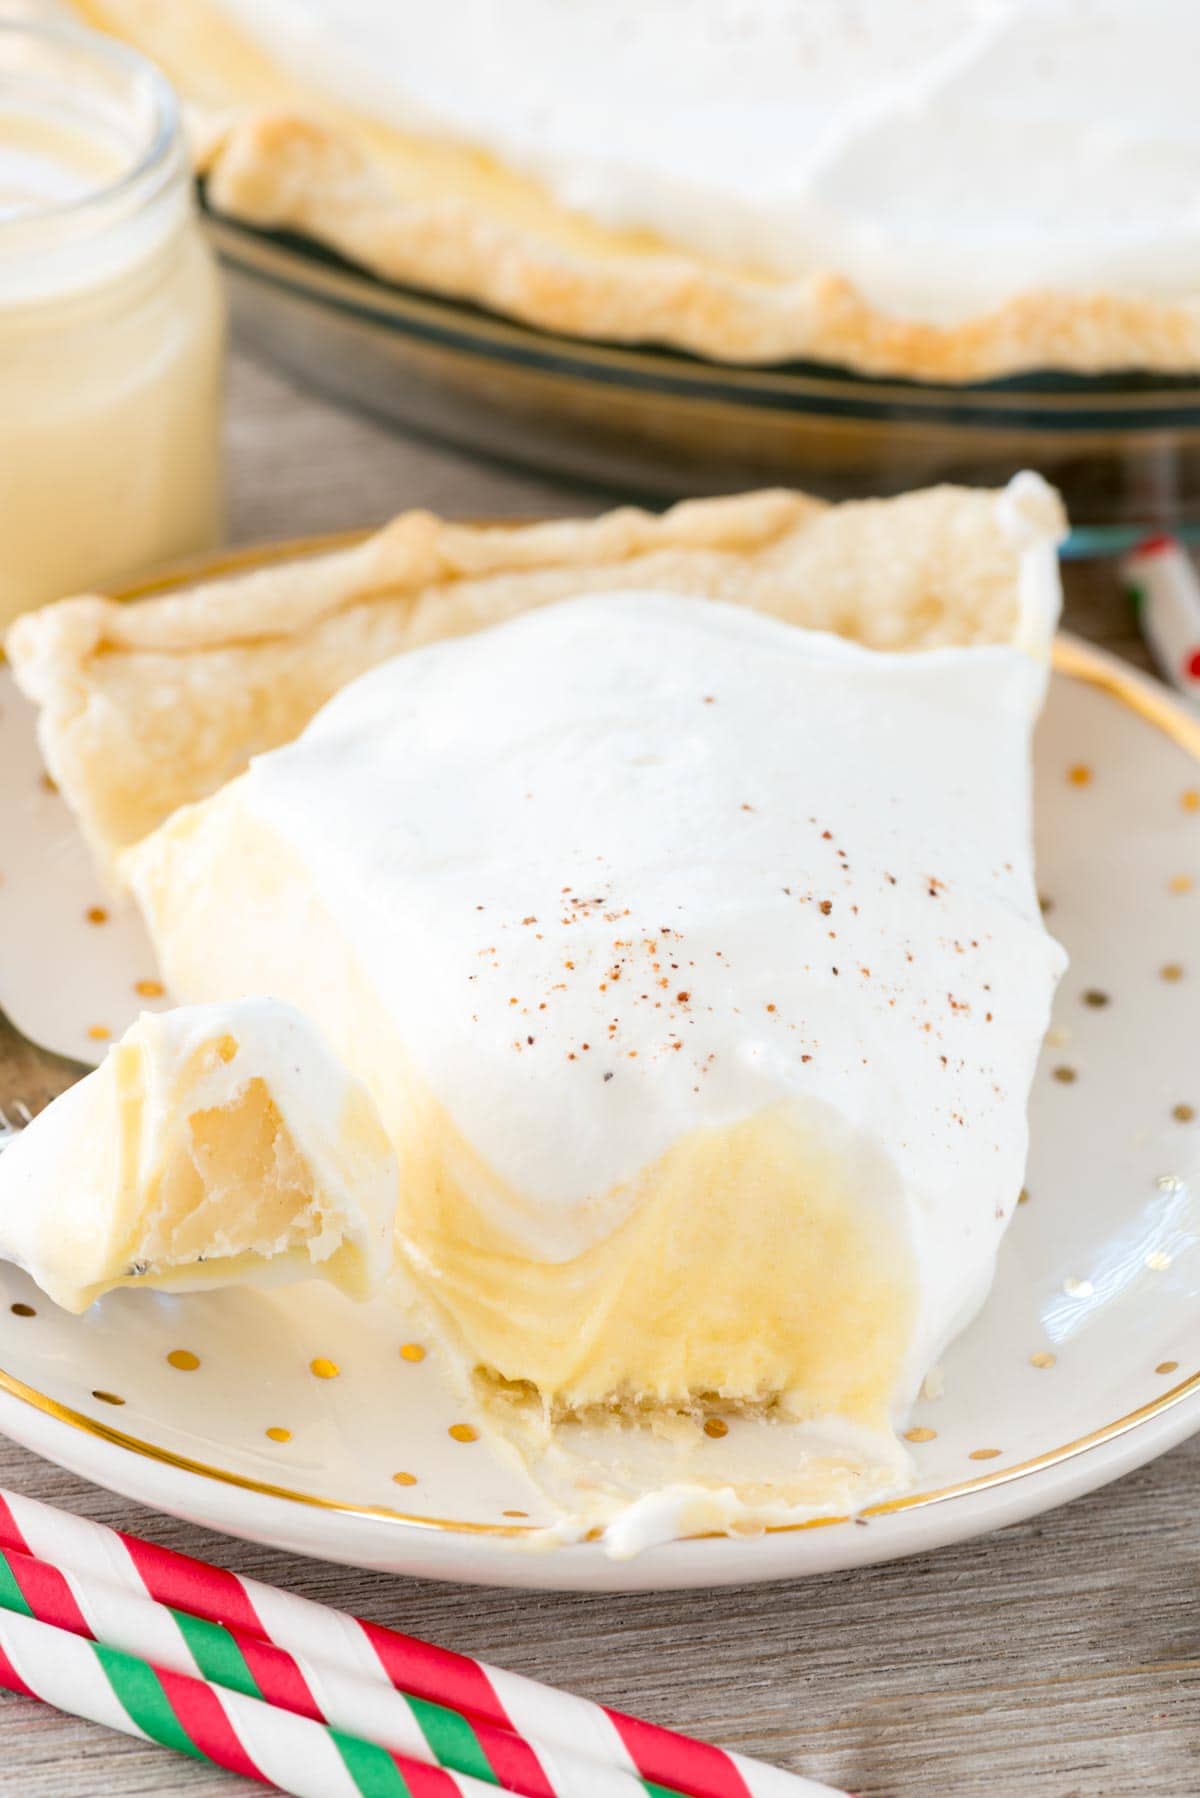 Easy Eggnog Pie - this cream pie recipe has only 4 ingredients! It's light and airy and tastes just like eggnog in a pie crust.